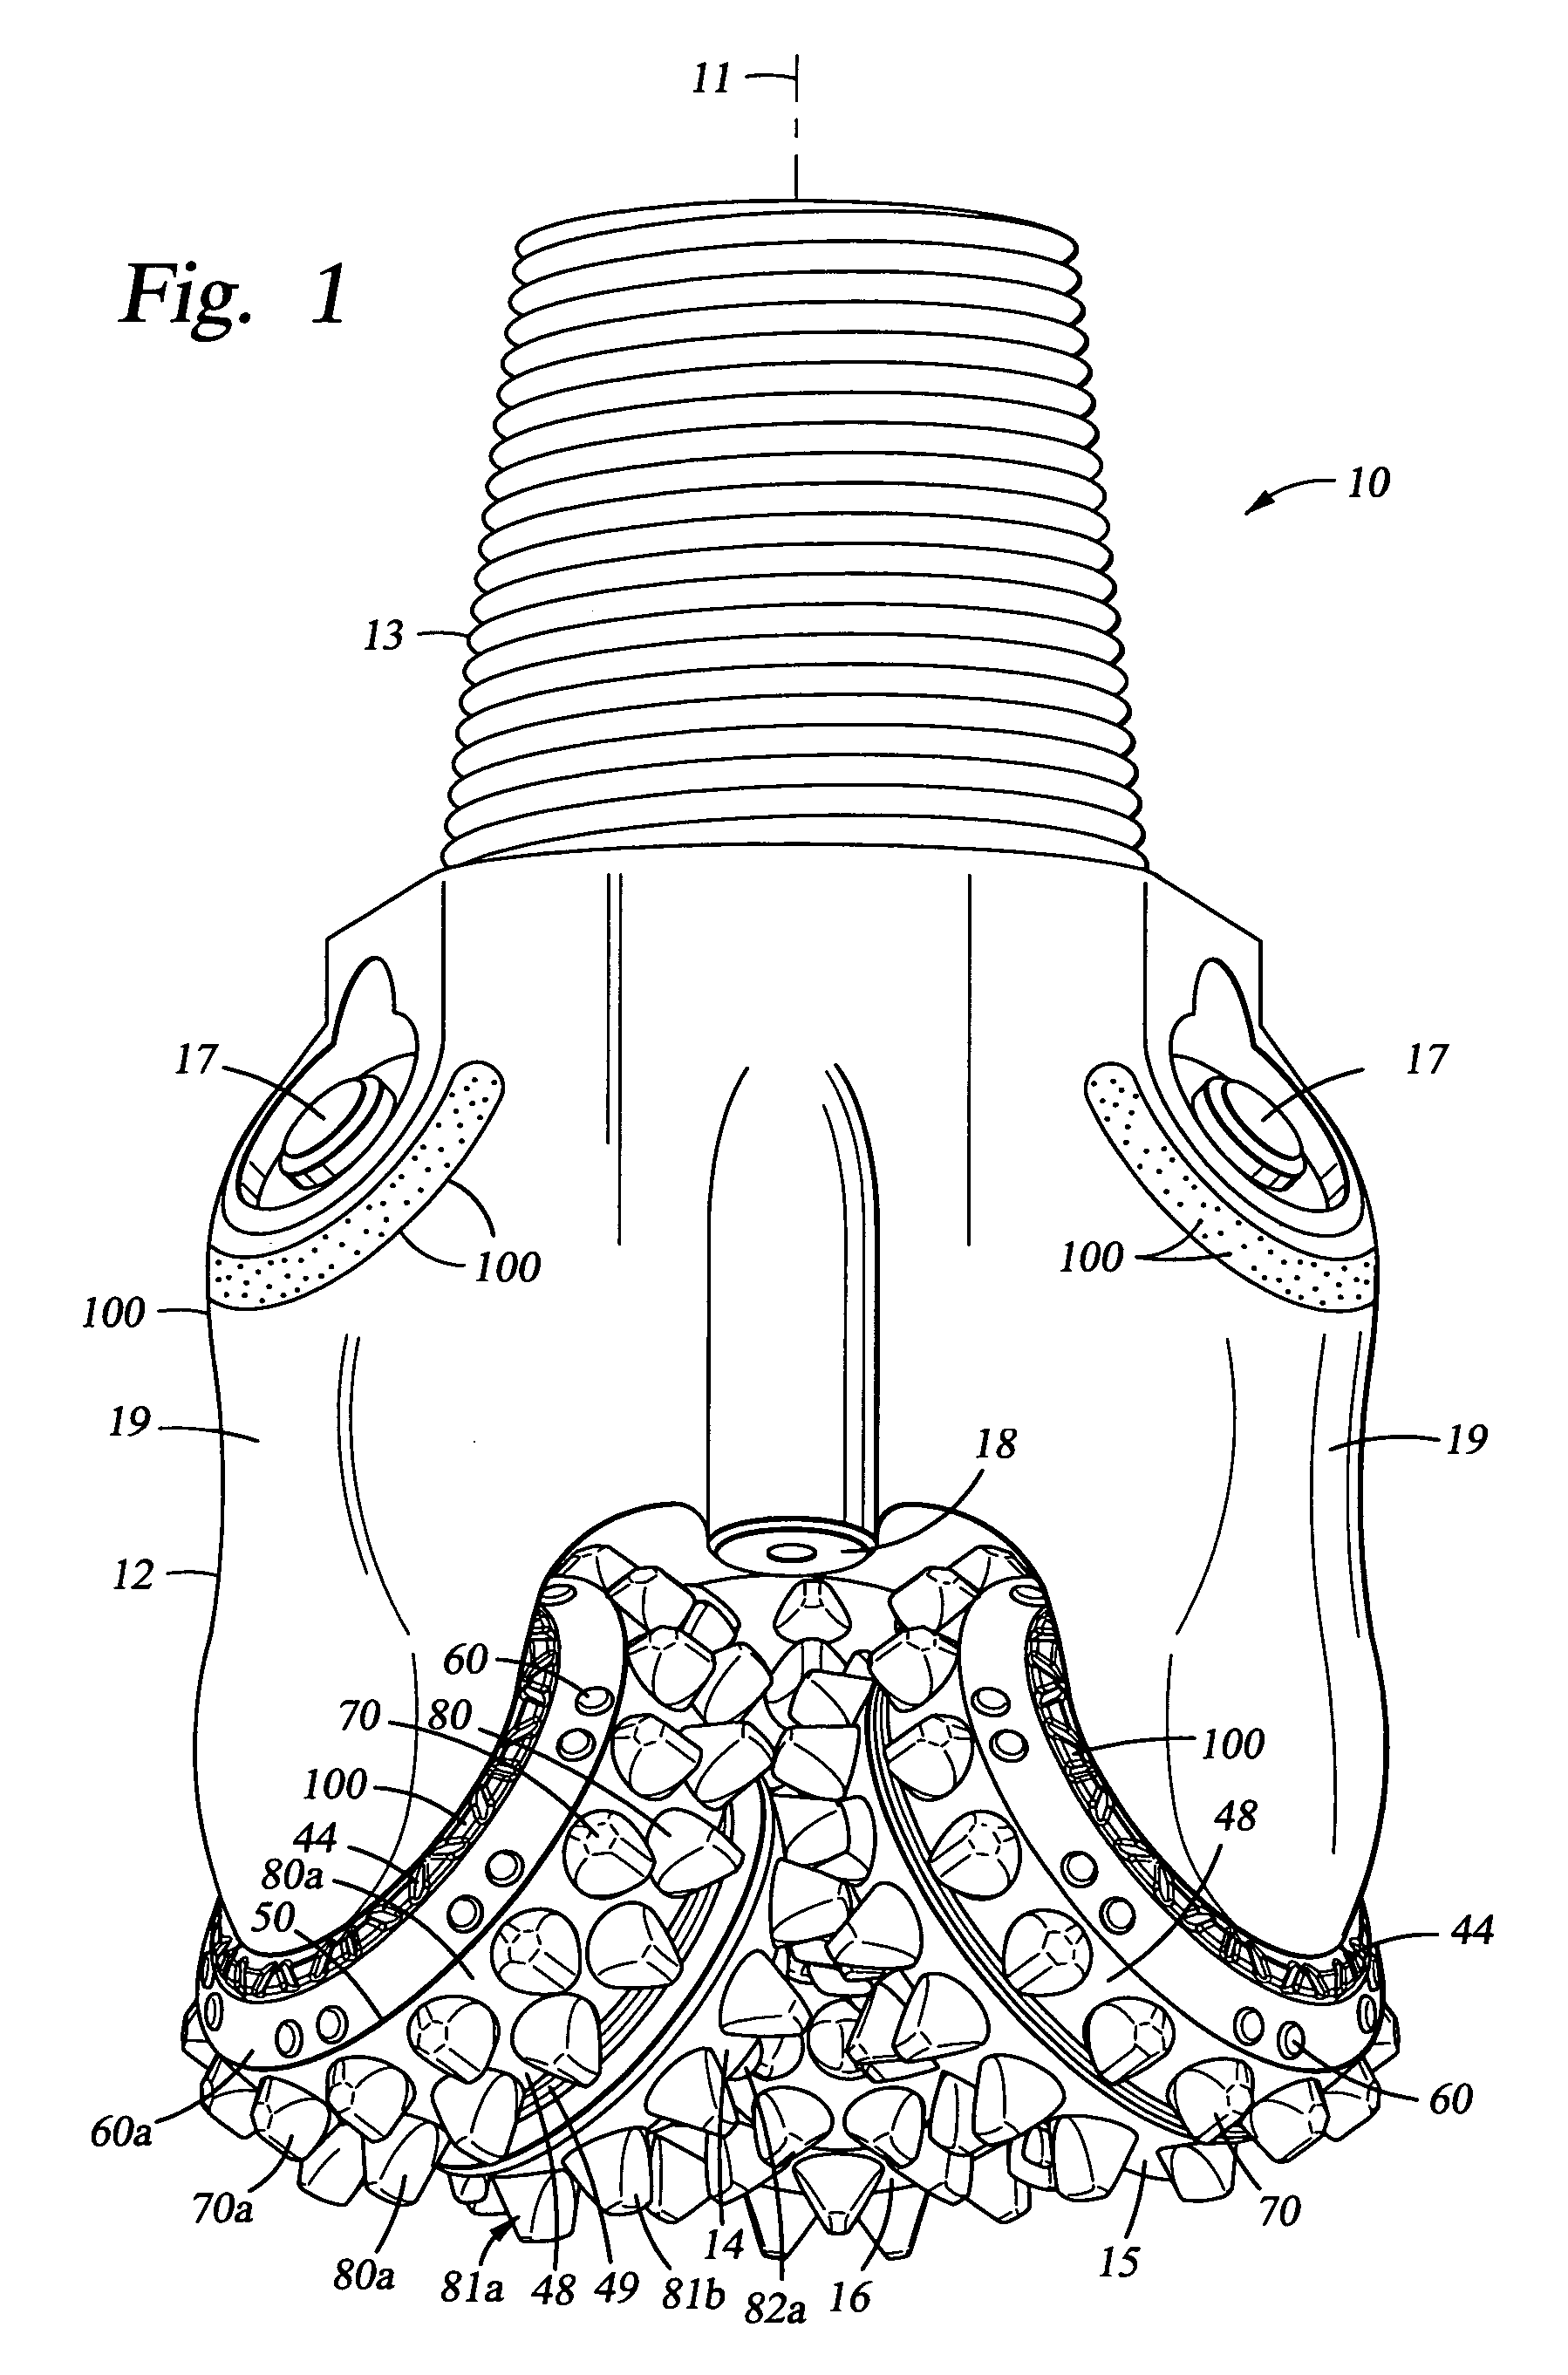 Drill bit arcuate-shaped inserts with cutting edges and method of manufacture